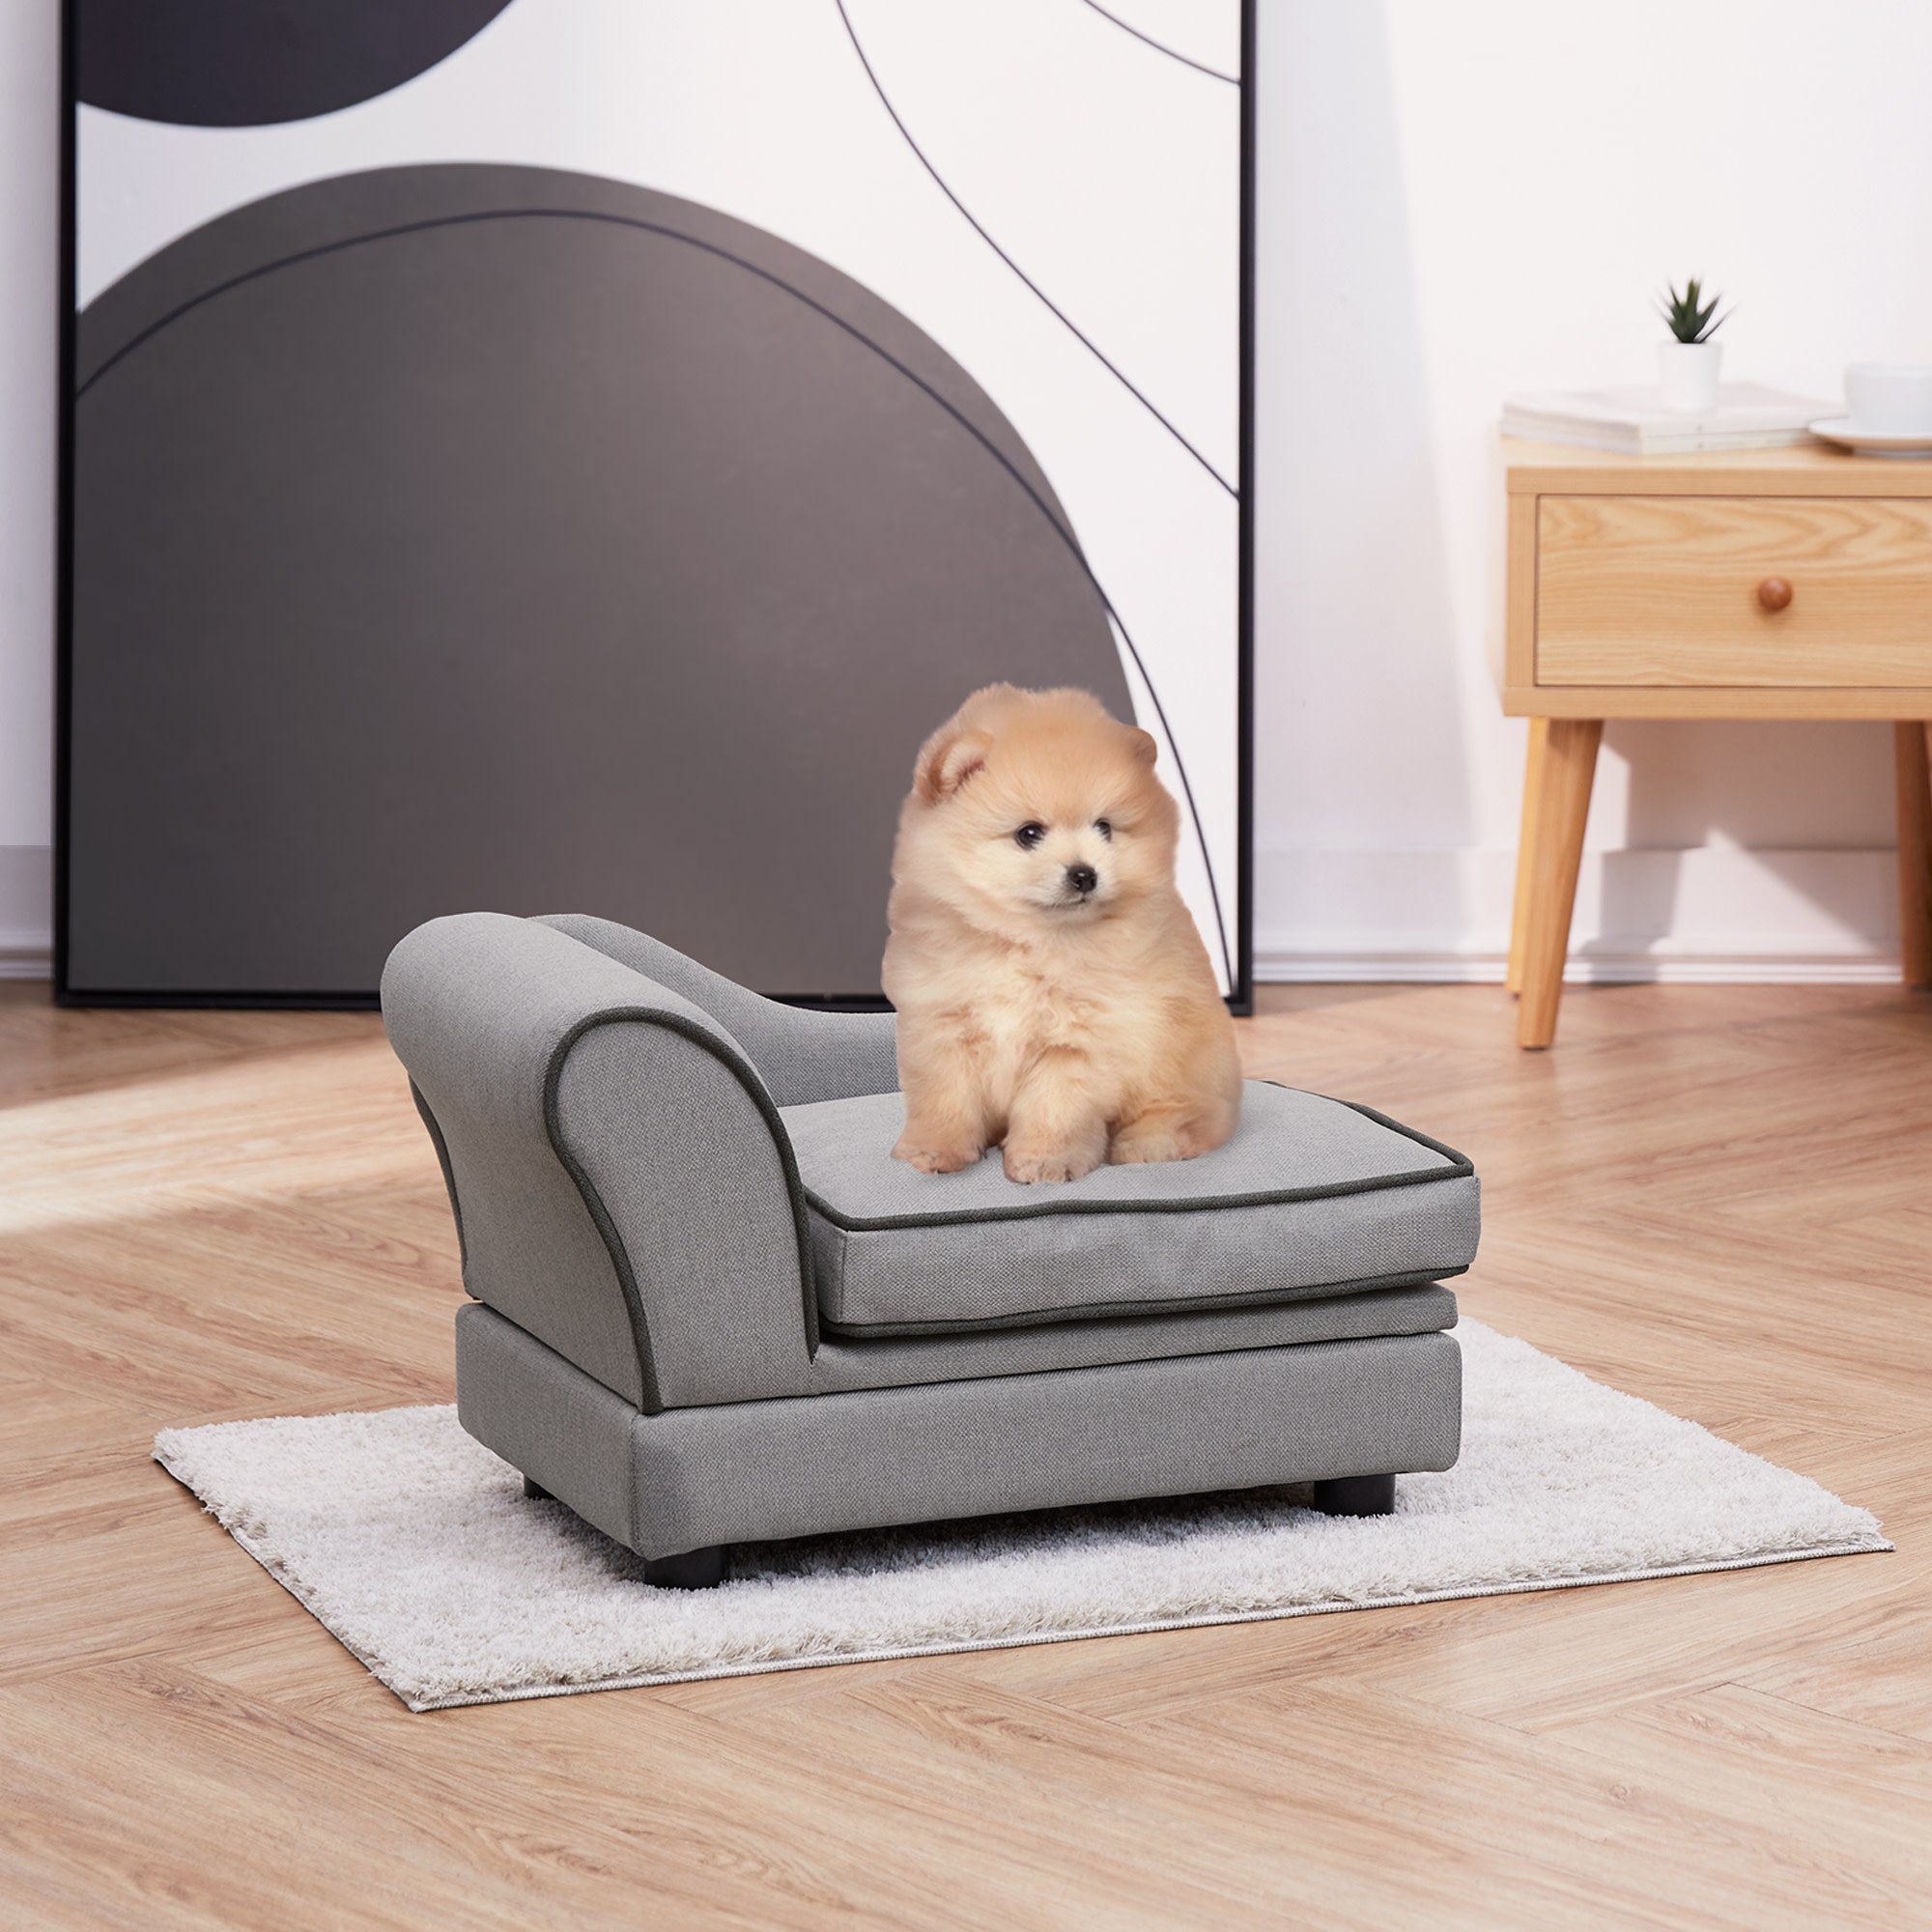 Teamson Pets Ivan Chaise Lounge Dog Bed with Storage for Cats & Extra-Small Dogs, Gray